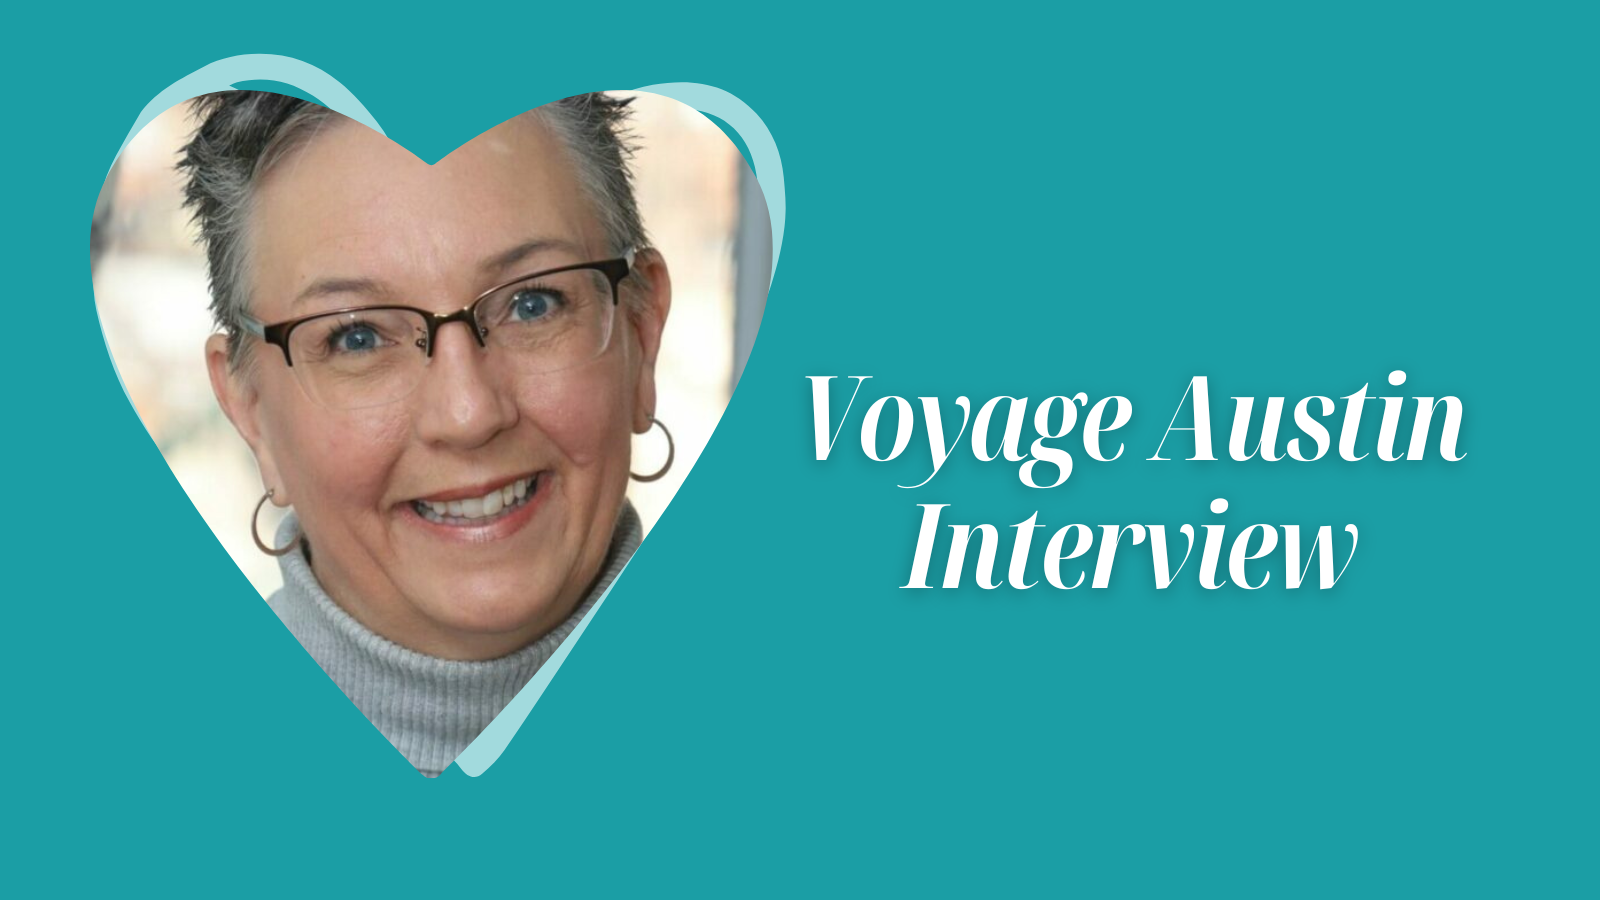 Voyage Austin Interviews Shelly Cole of Altared Events